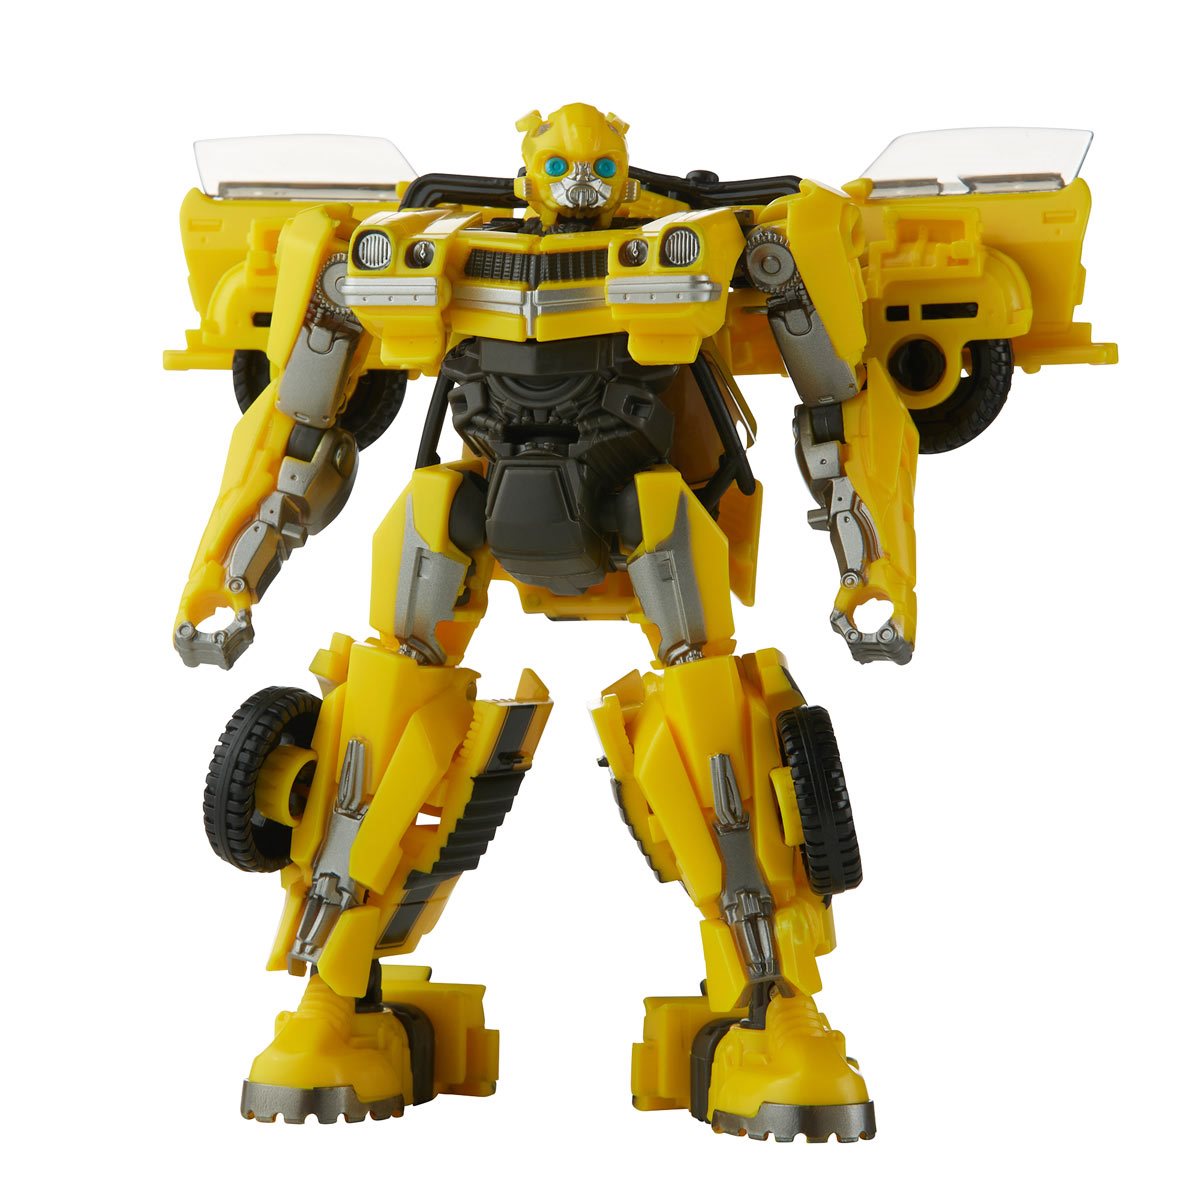 Transformers Studio Series Deluxe Rise of the Beasts Bumblebee Action Figure Toy